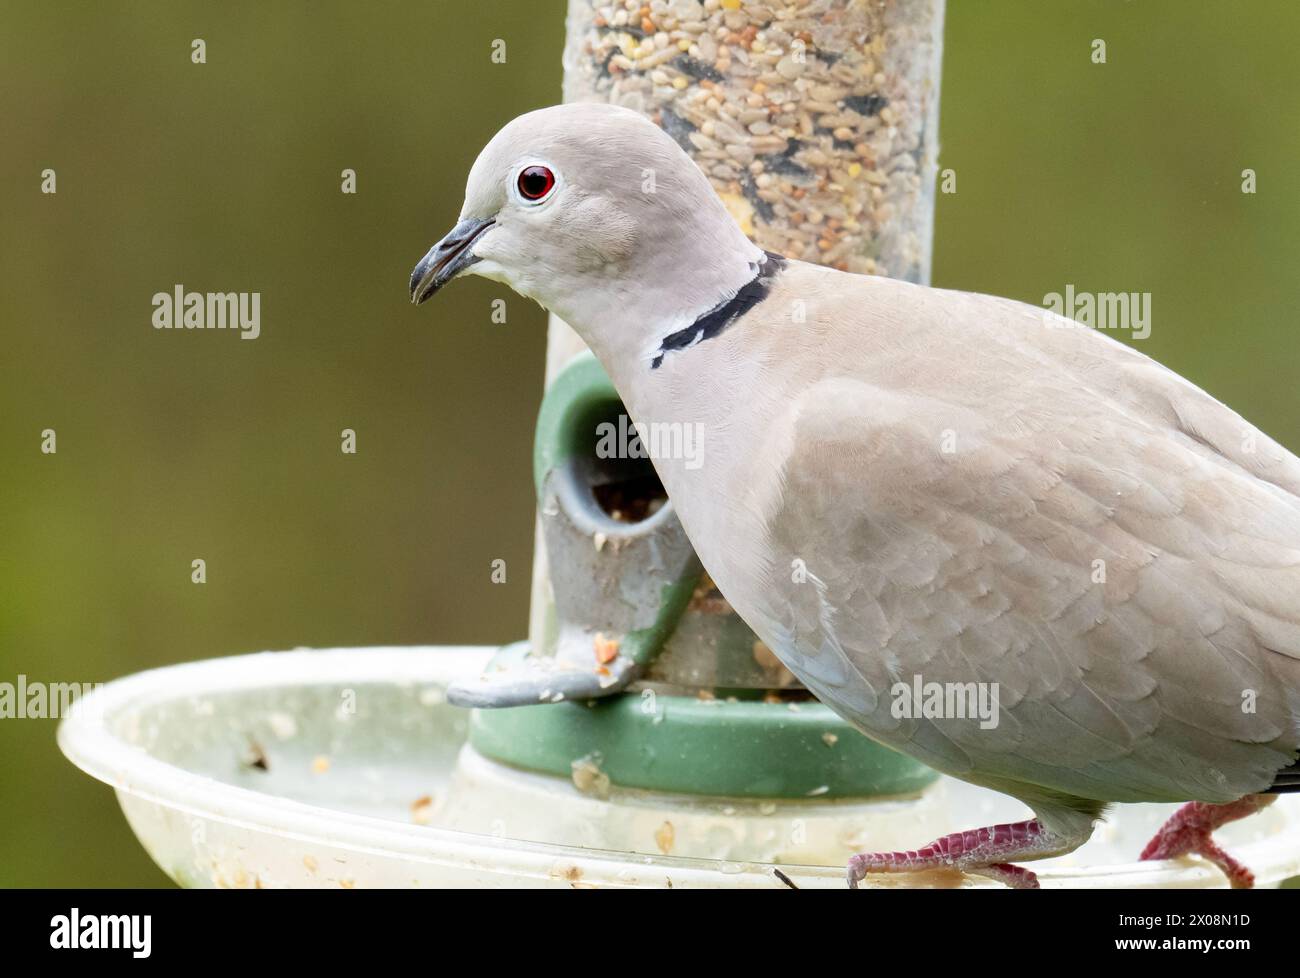 A Collared Dove, Streptopelia decaocto at Leighton Moss, Silverdale, Lancashire, Royaume-Uni. Banque D'Images